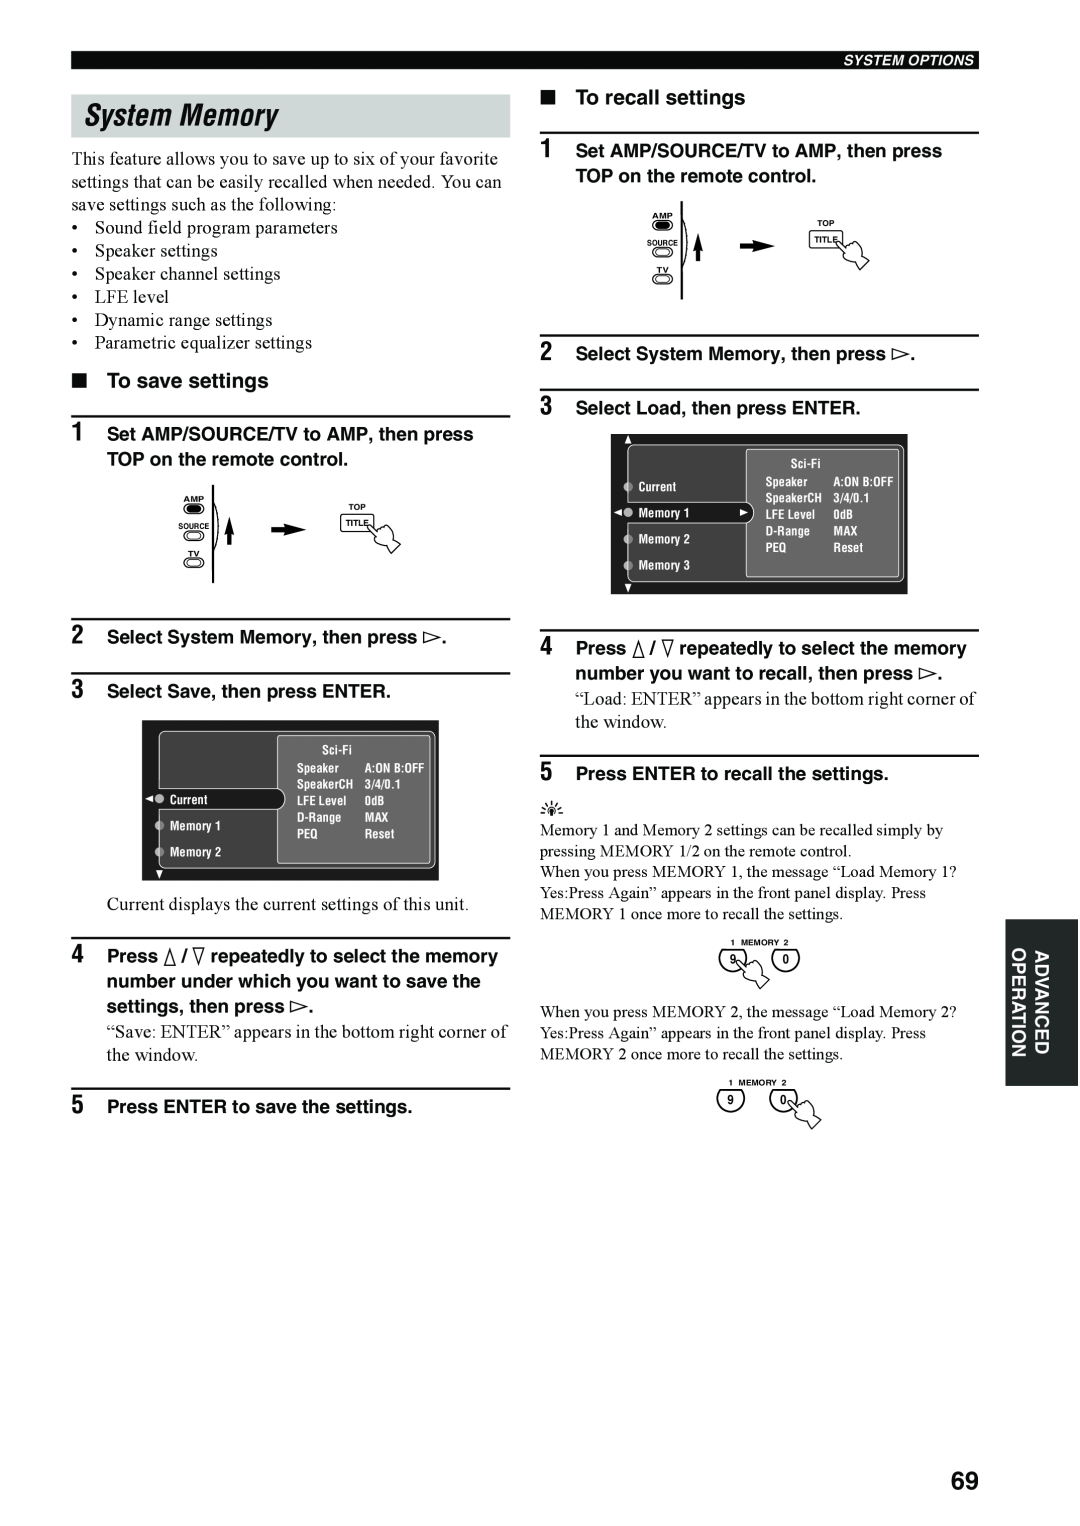 Yamaha RX-V4600 owner manual System Memory, To save settings, To recall settings, Press ENTER to save the settings 